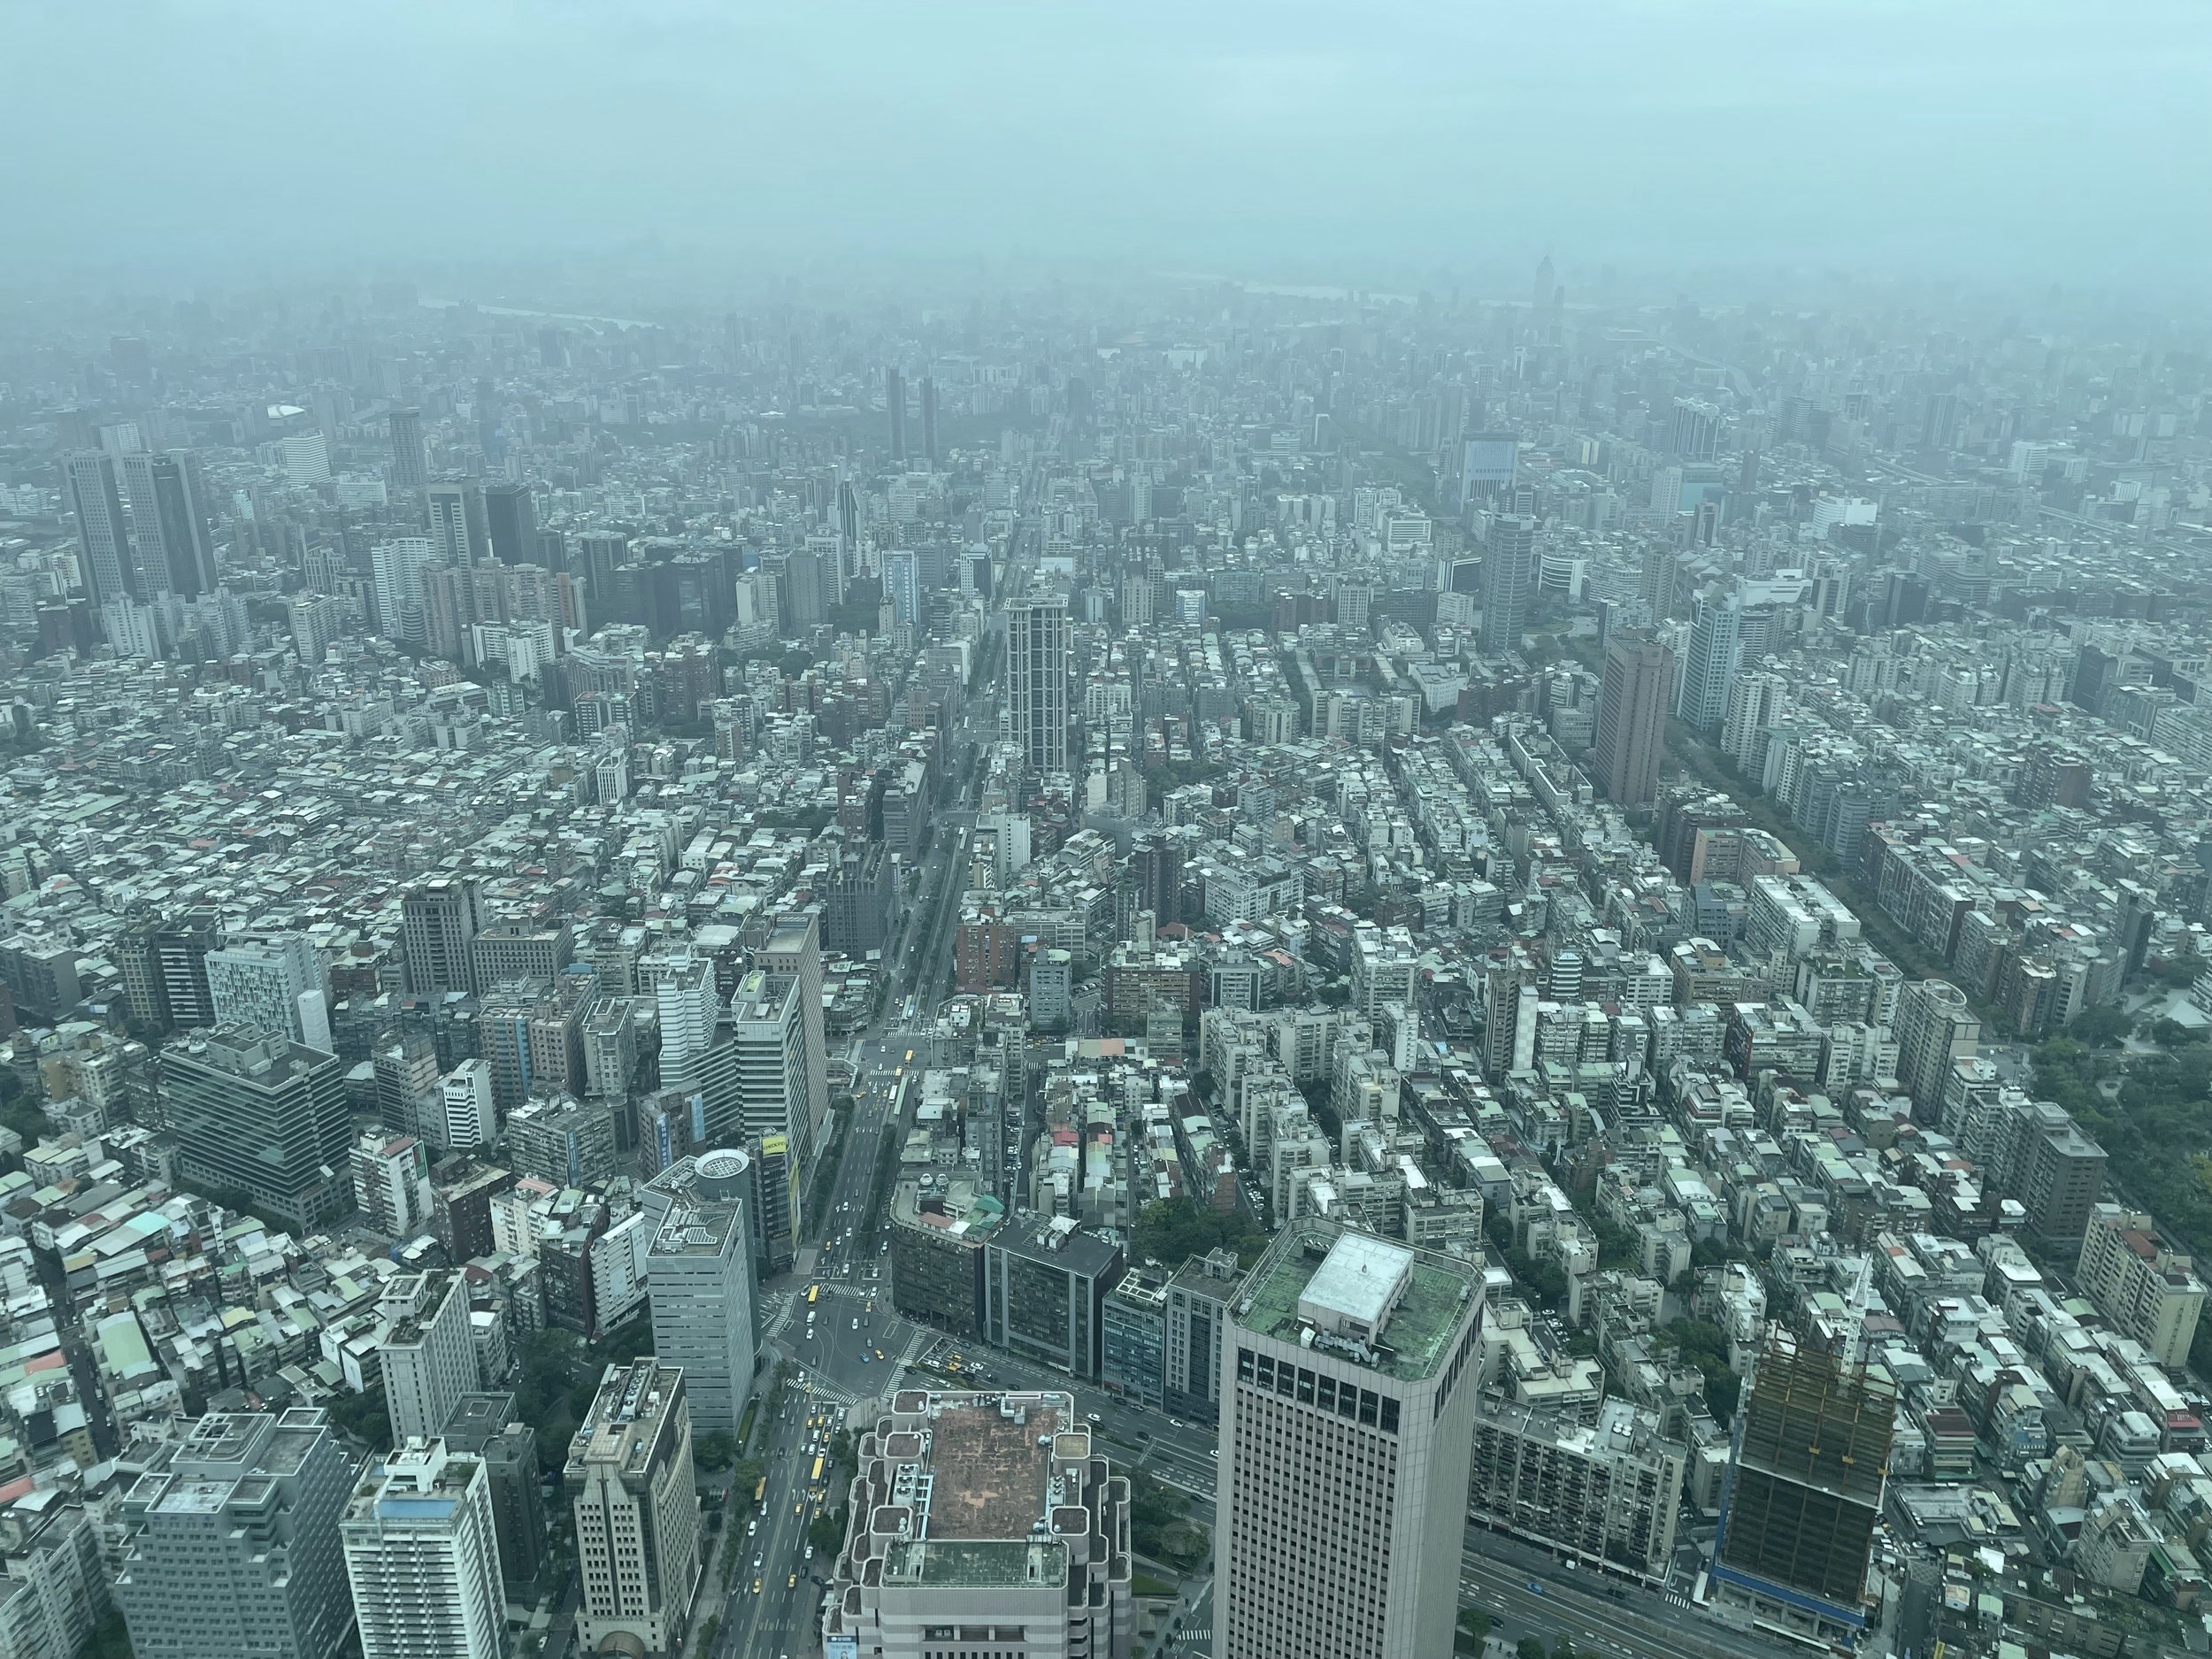 View from Taipei 101 looking West